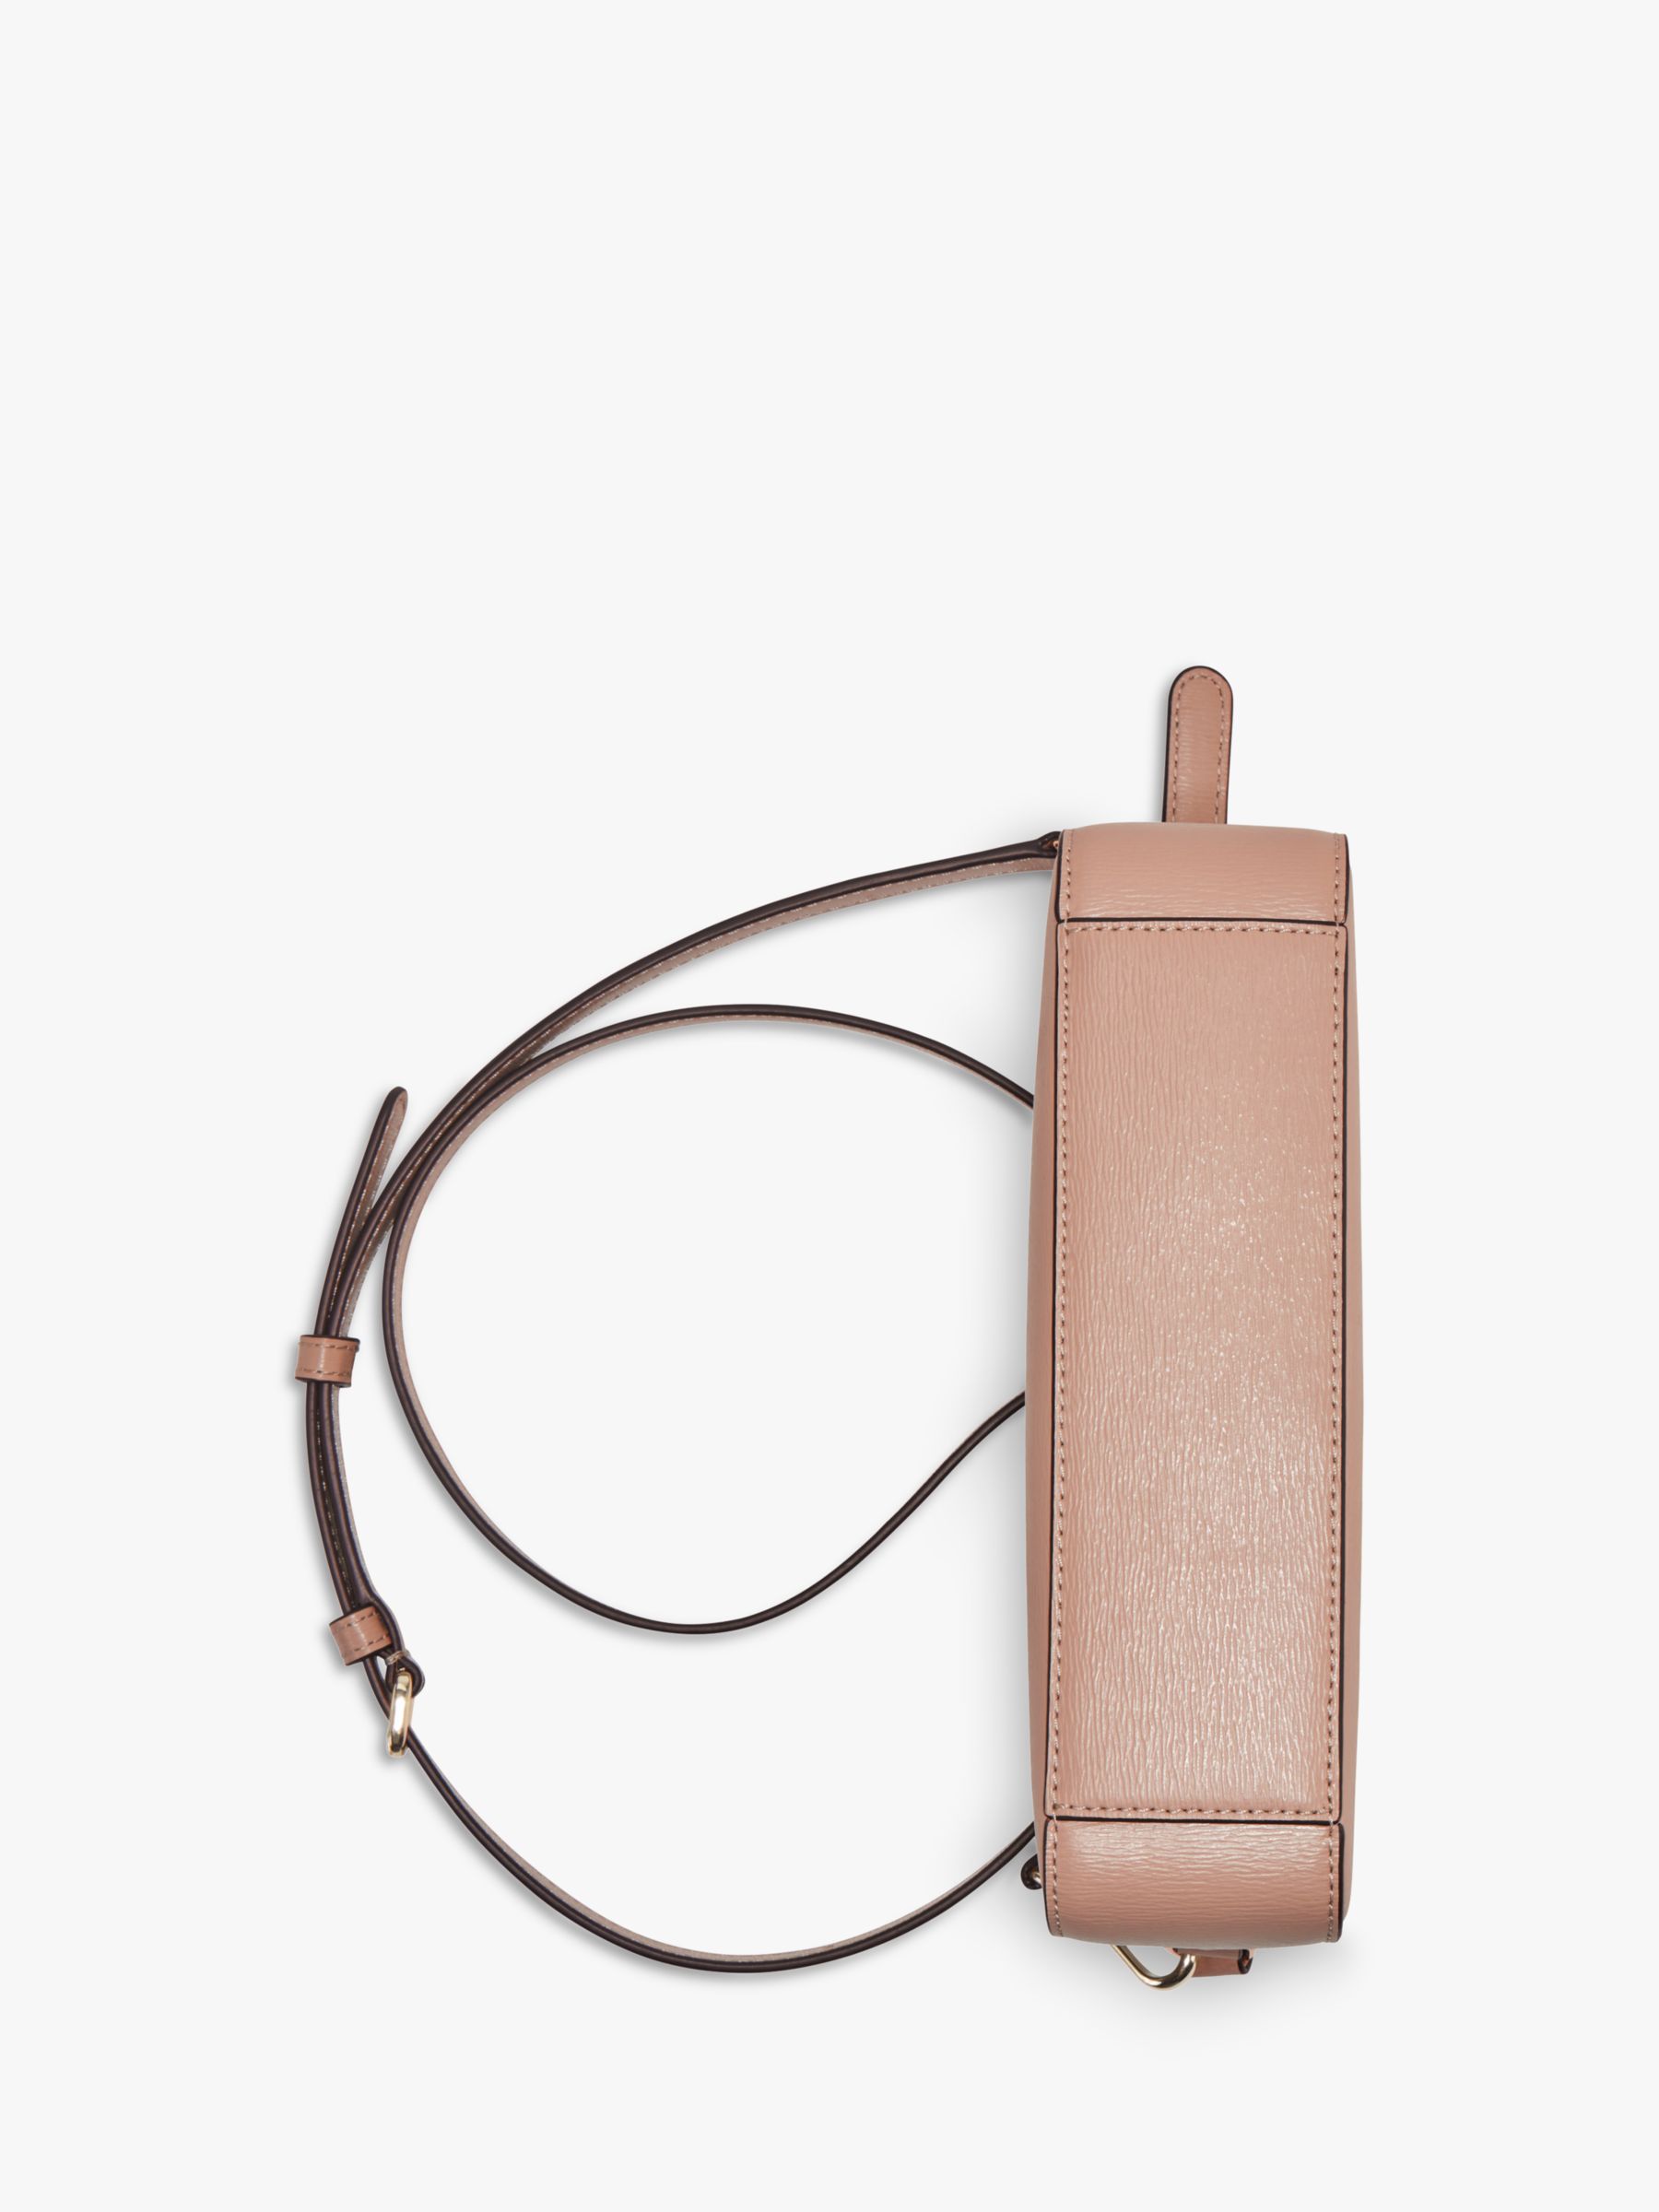 DKNY Bryant Leather Cross Body Bag, Cameo at John Lewis & Partners